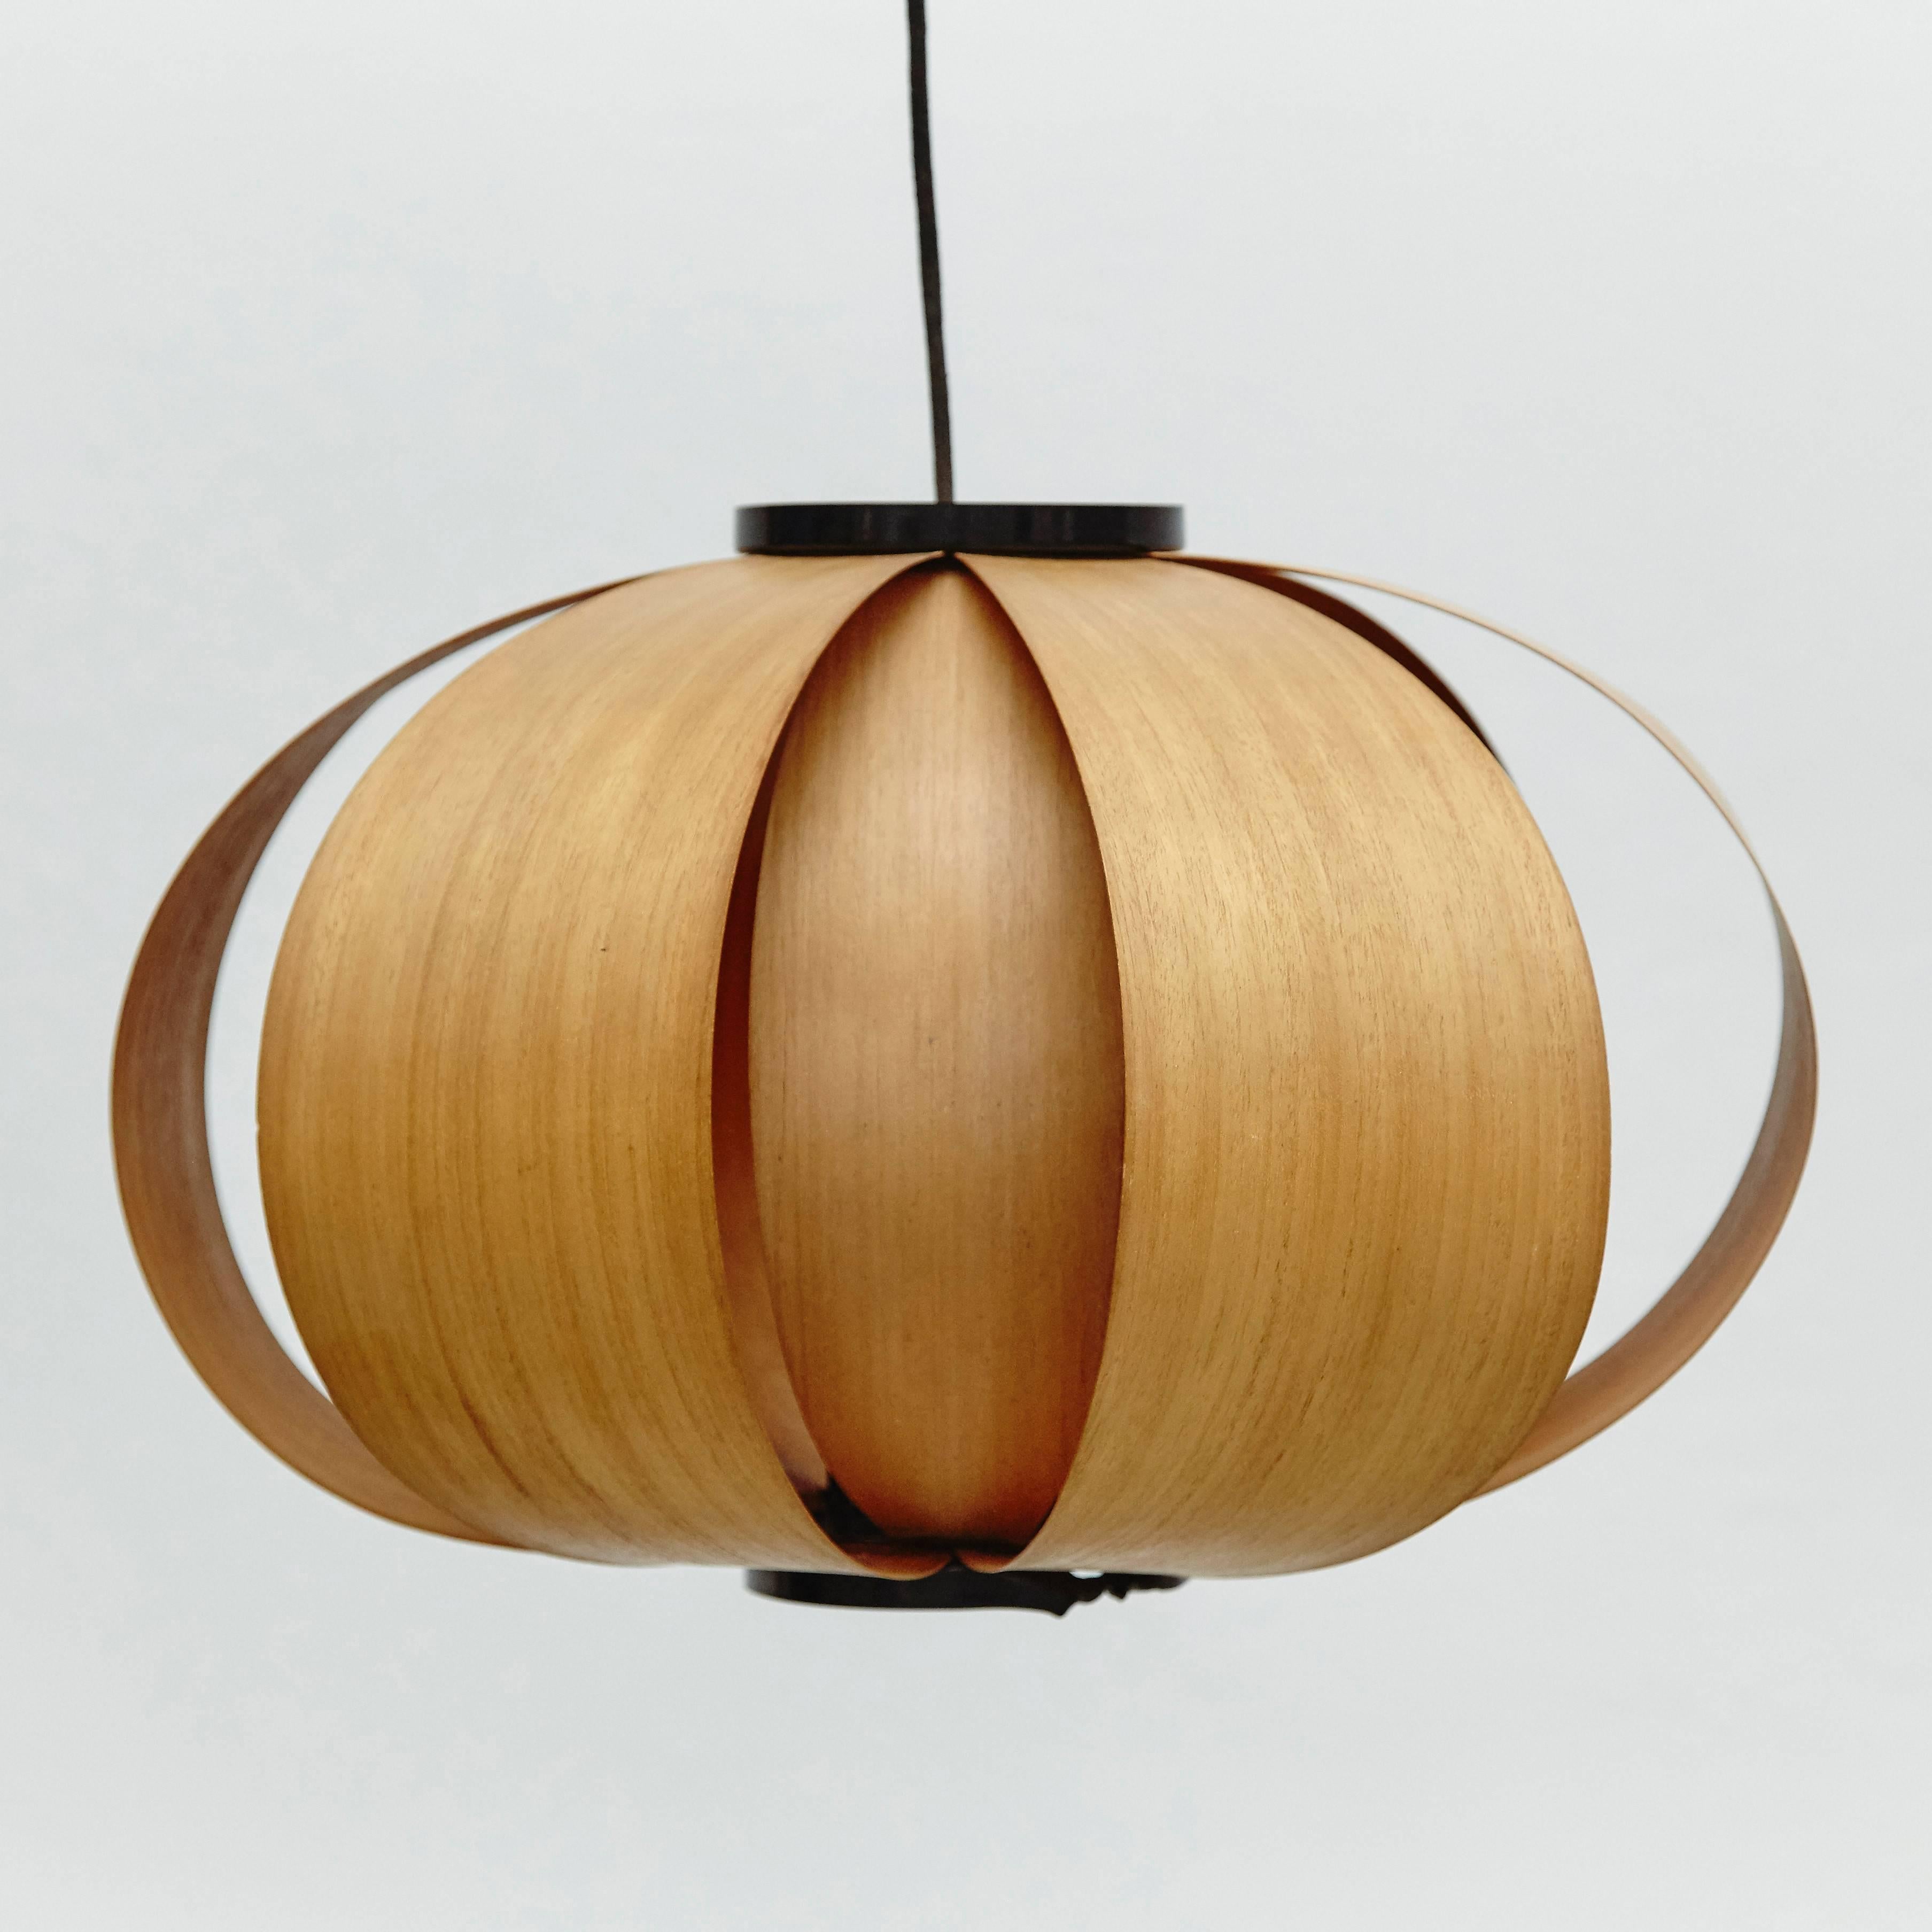 Disa lamp or Coderch lamp, designed by Jose Antonio Coderch in 1957, manufactured in Spain, circa 1950.
It's composed by two sheets of bentwood in two different layers size.
Aluminium structure and bentwood as lampshade.

The intention is to